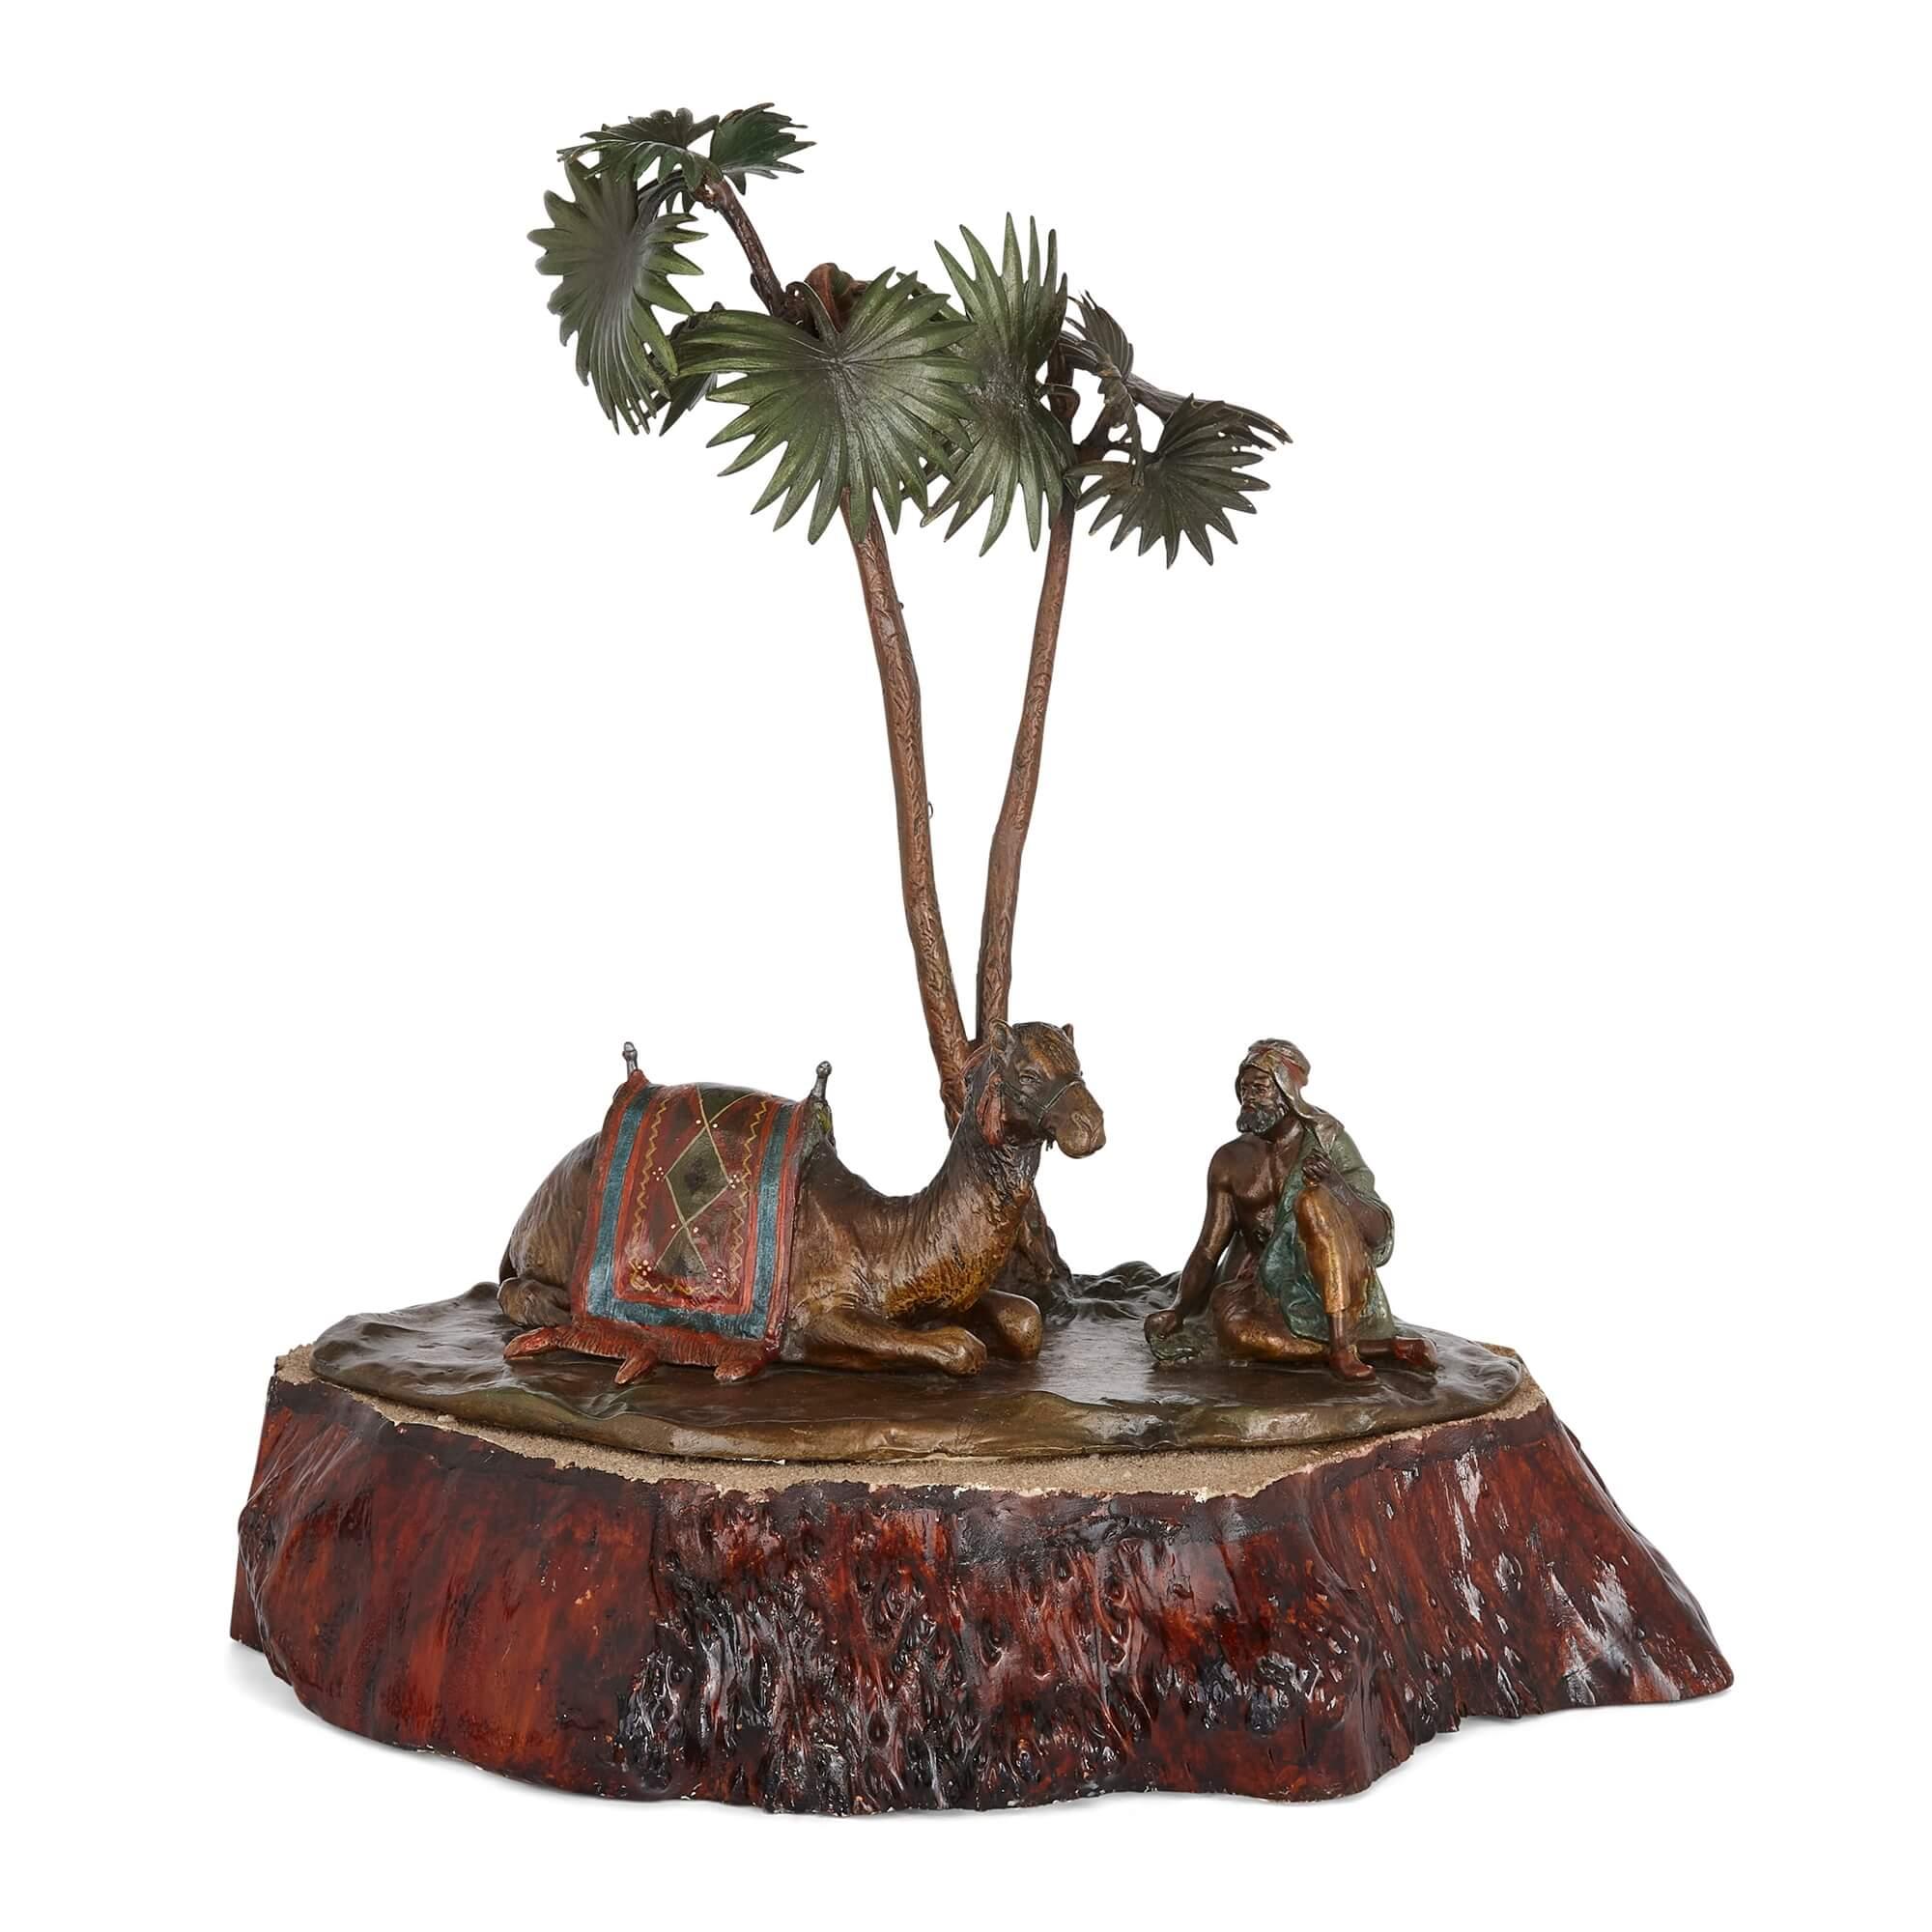 Large Austrian wood and cold-painted bronze lamp 
Austria, c. 1910
Height 42cm, width 41cm, depth 30cm

This Orientalist lamp is an unusual example of the cold-painted bronze designs that were flourishing in Vienna at the turn of the 20th century.